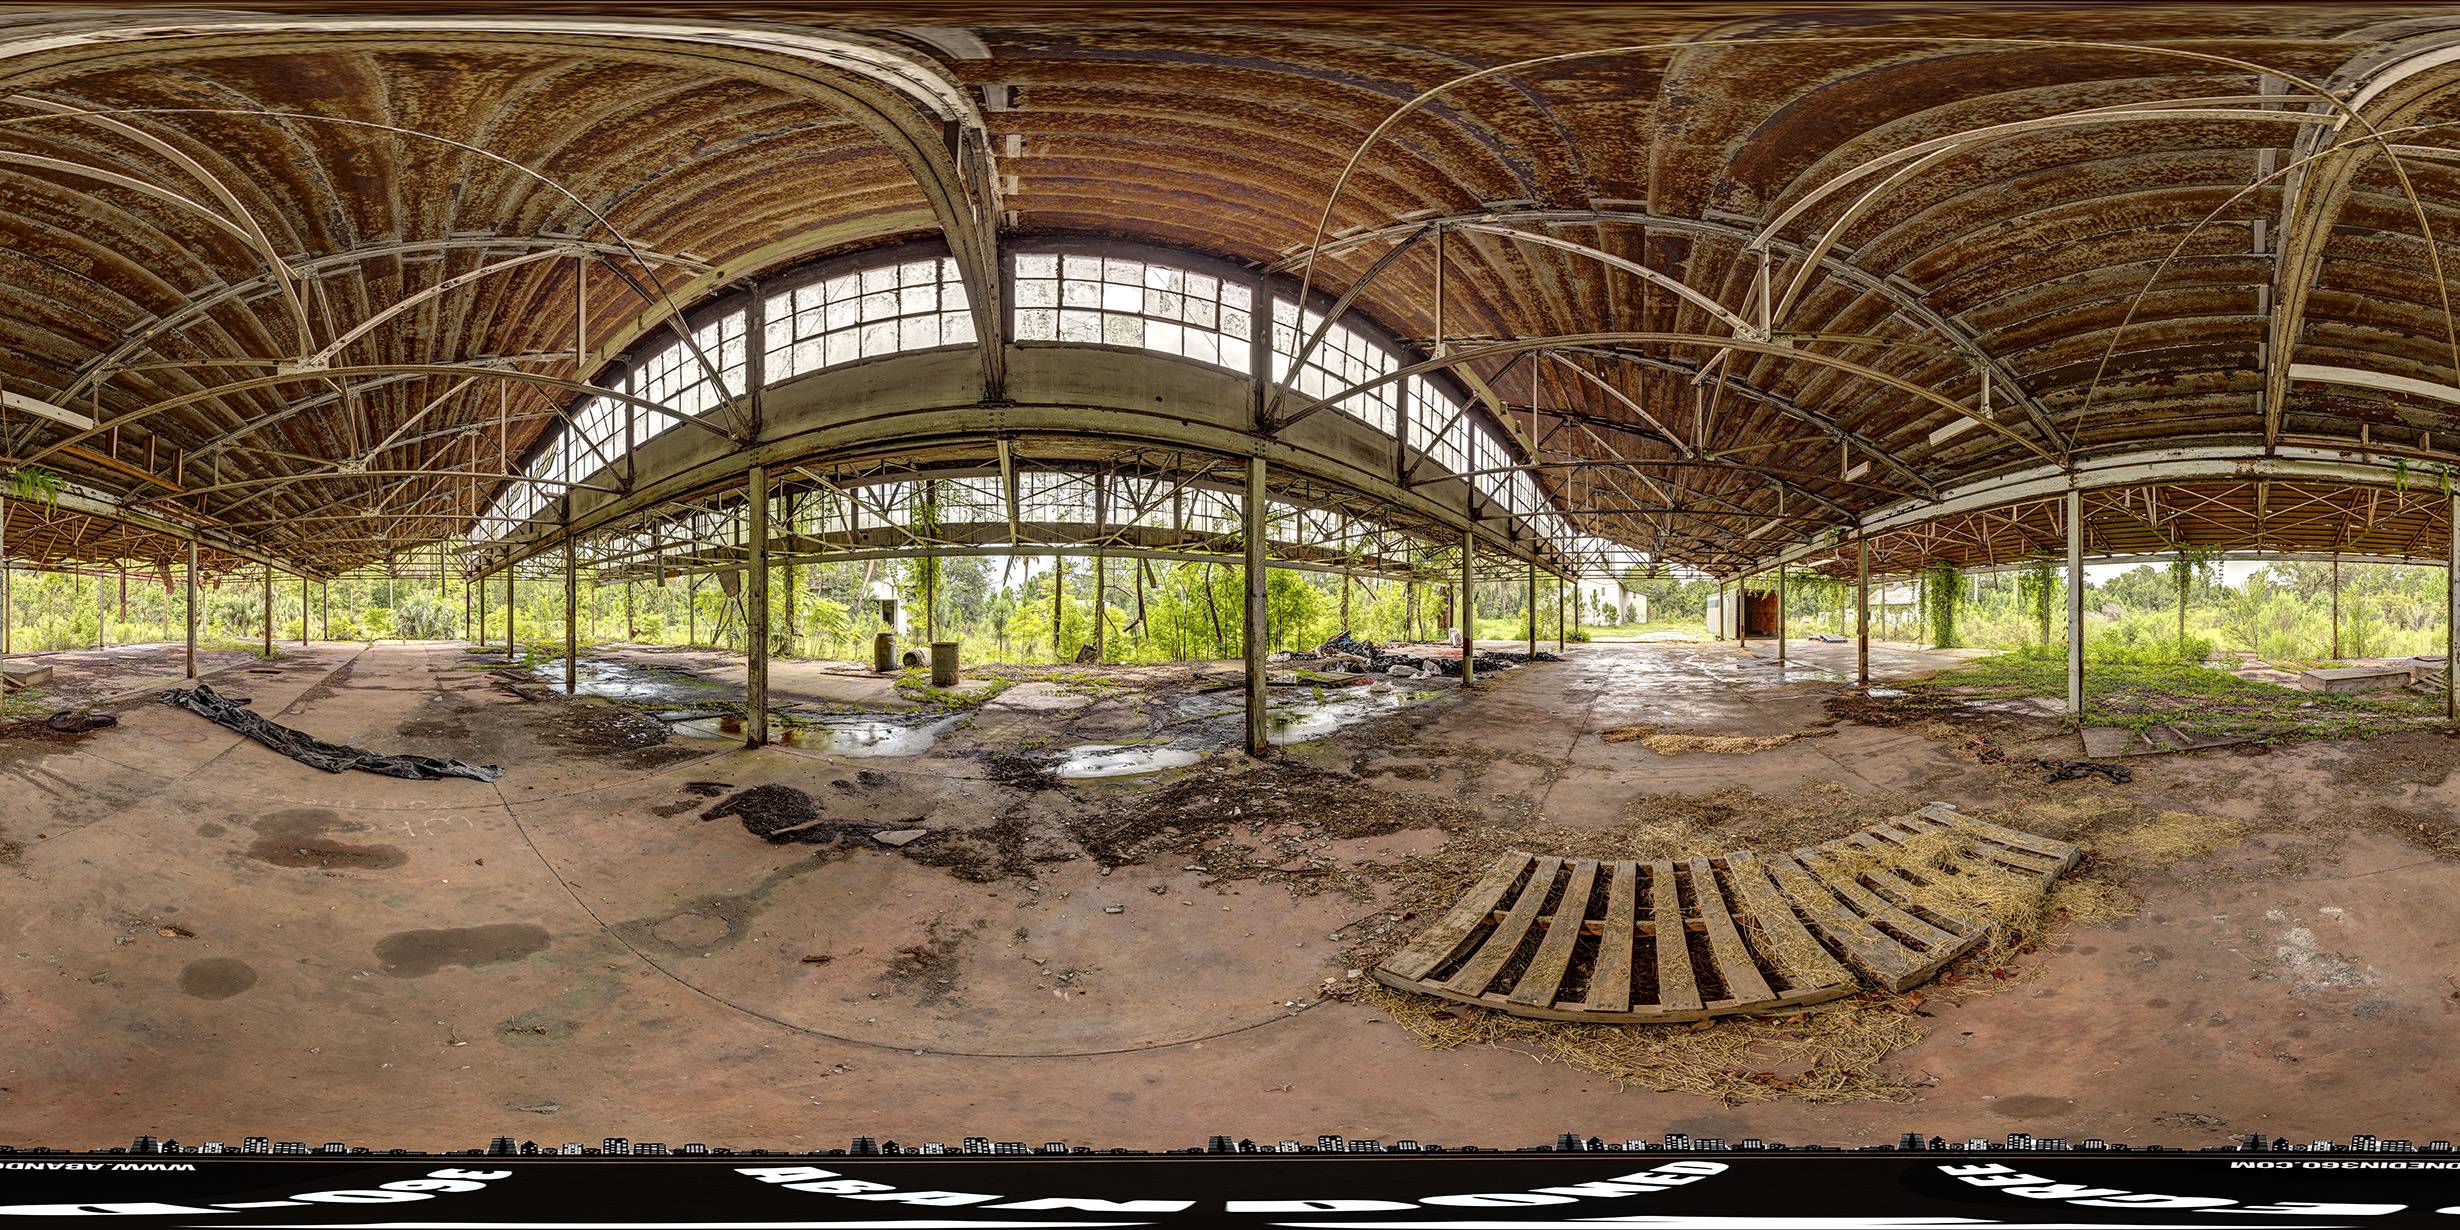 A 360-degree panoramic image at the Strawn Historic Citrus Packing House District in Deleon, Springs, Florida. 